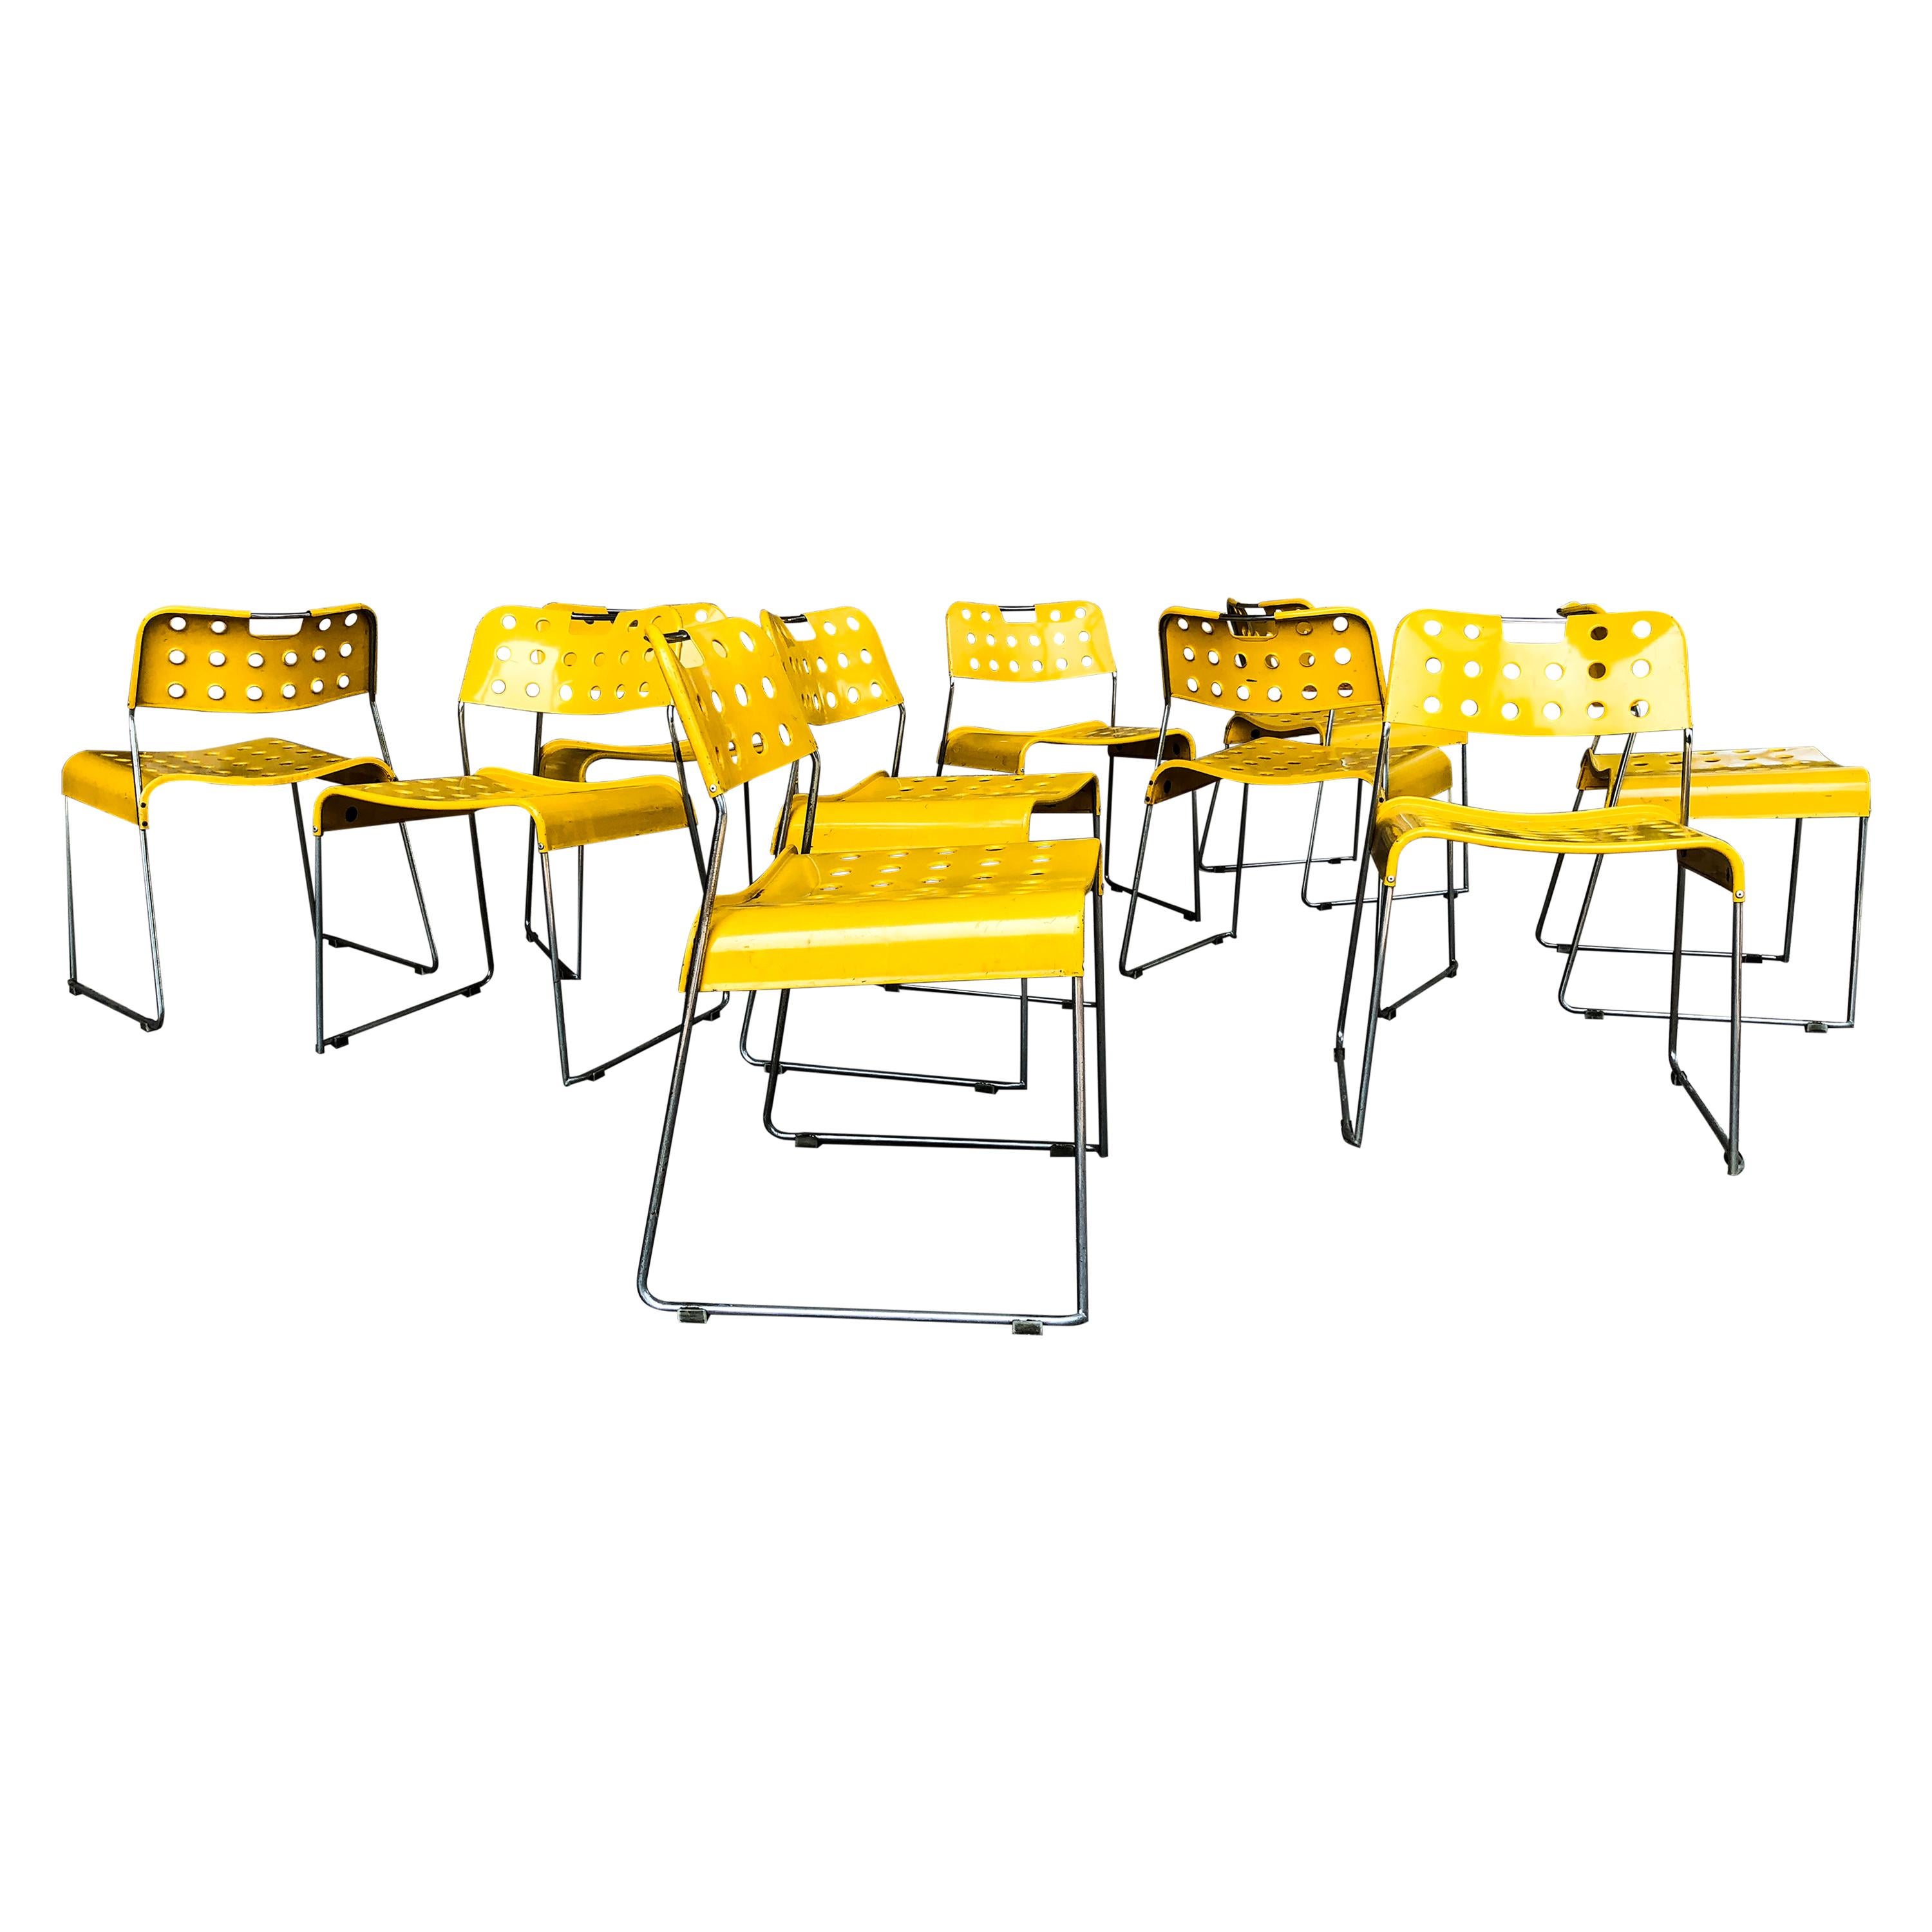 Rodney Kinsman Space Age Yellow Omstak Chair for Bieffeplast, 1971, Set of 4 For Sale 3